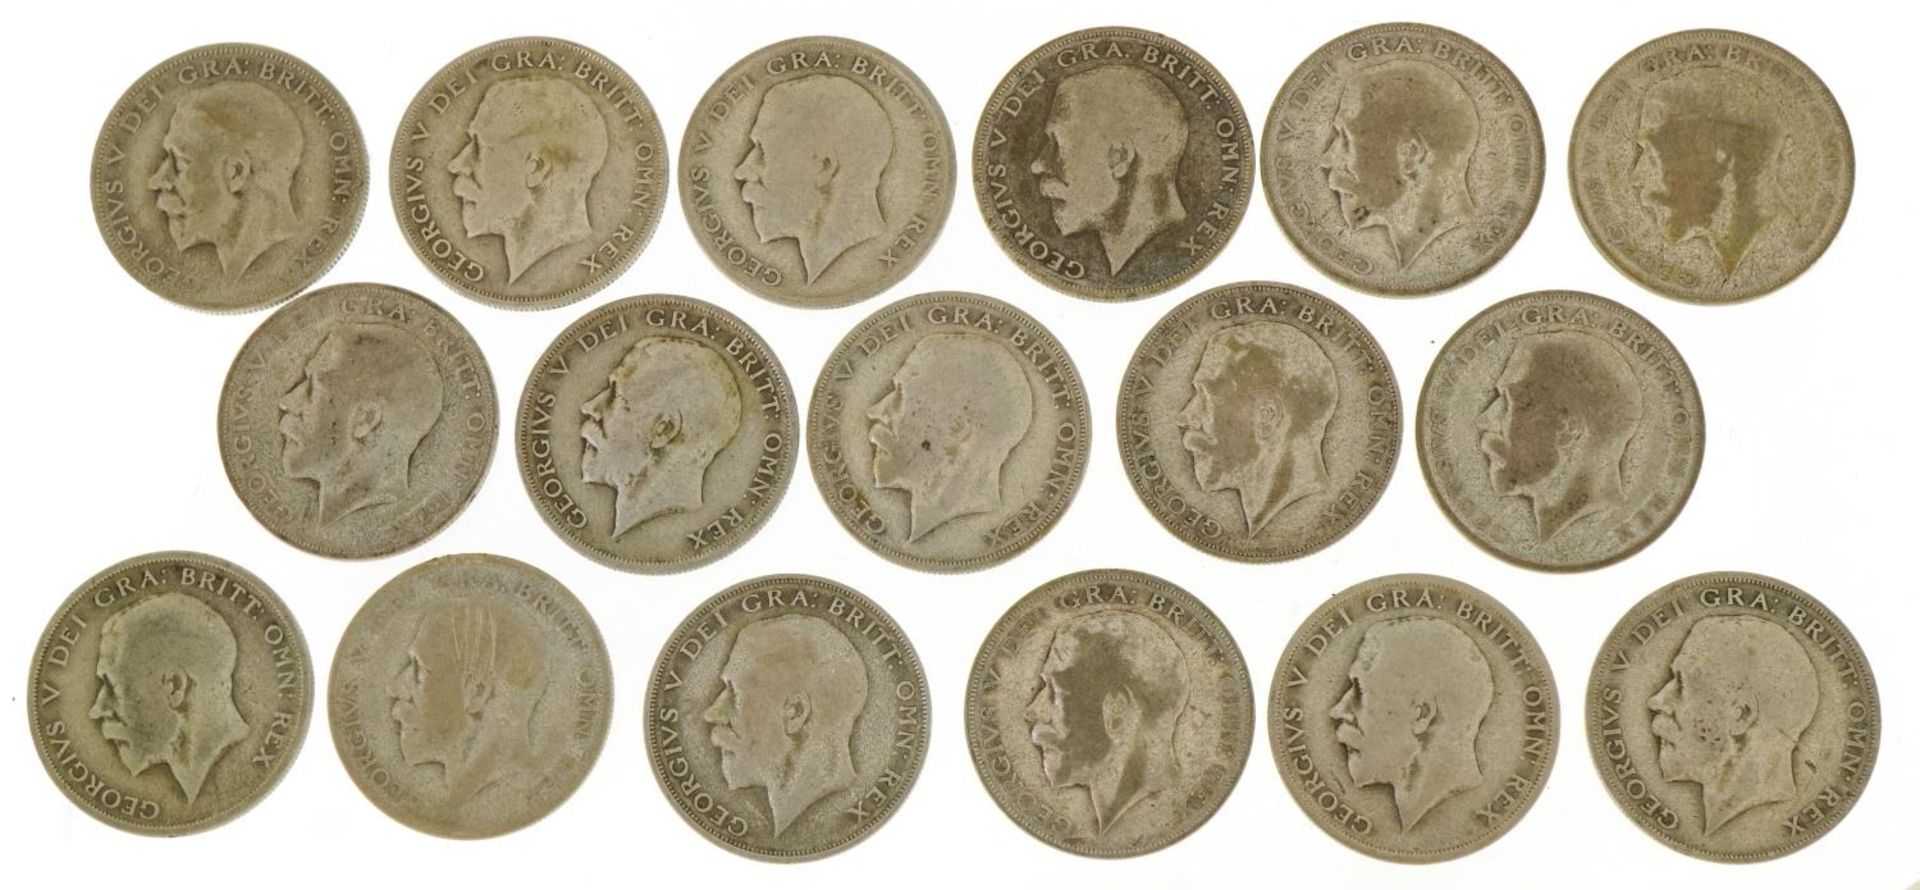 British pre decimal, pre 1947 half crowns, 232.8g For further information on this lot please contact